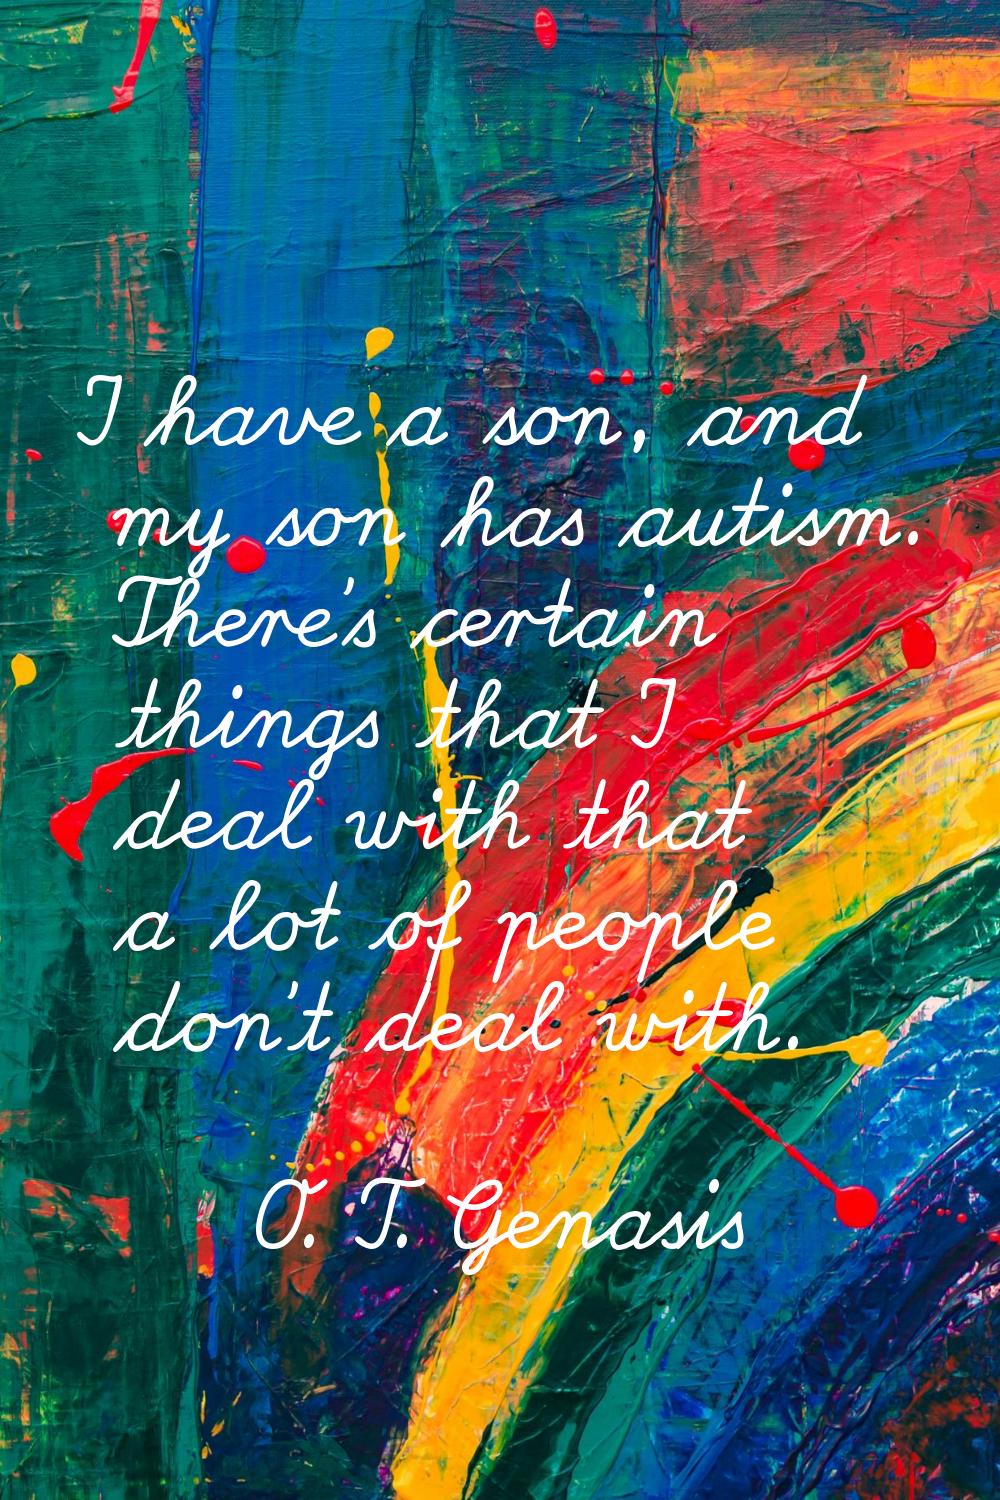 I have a son, and my son has autism. There's certain things that I deal with that a lot of people d